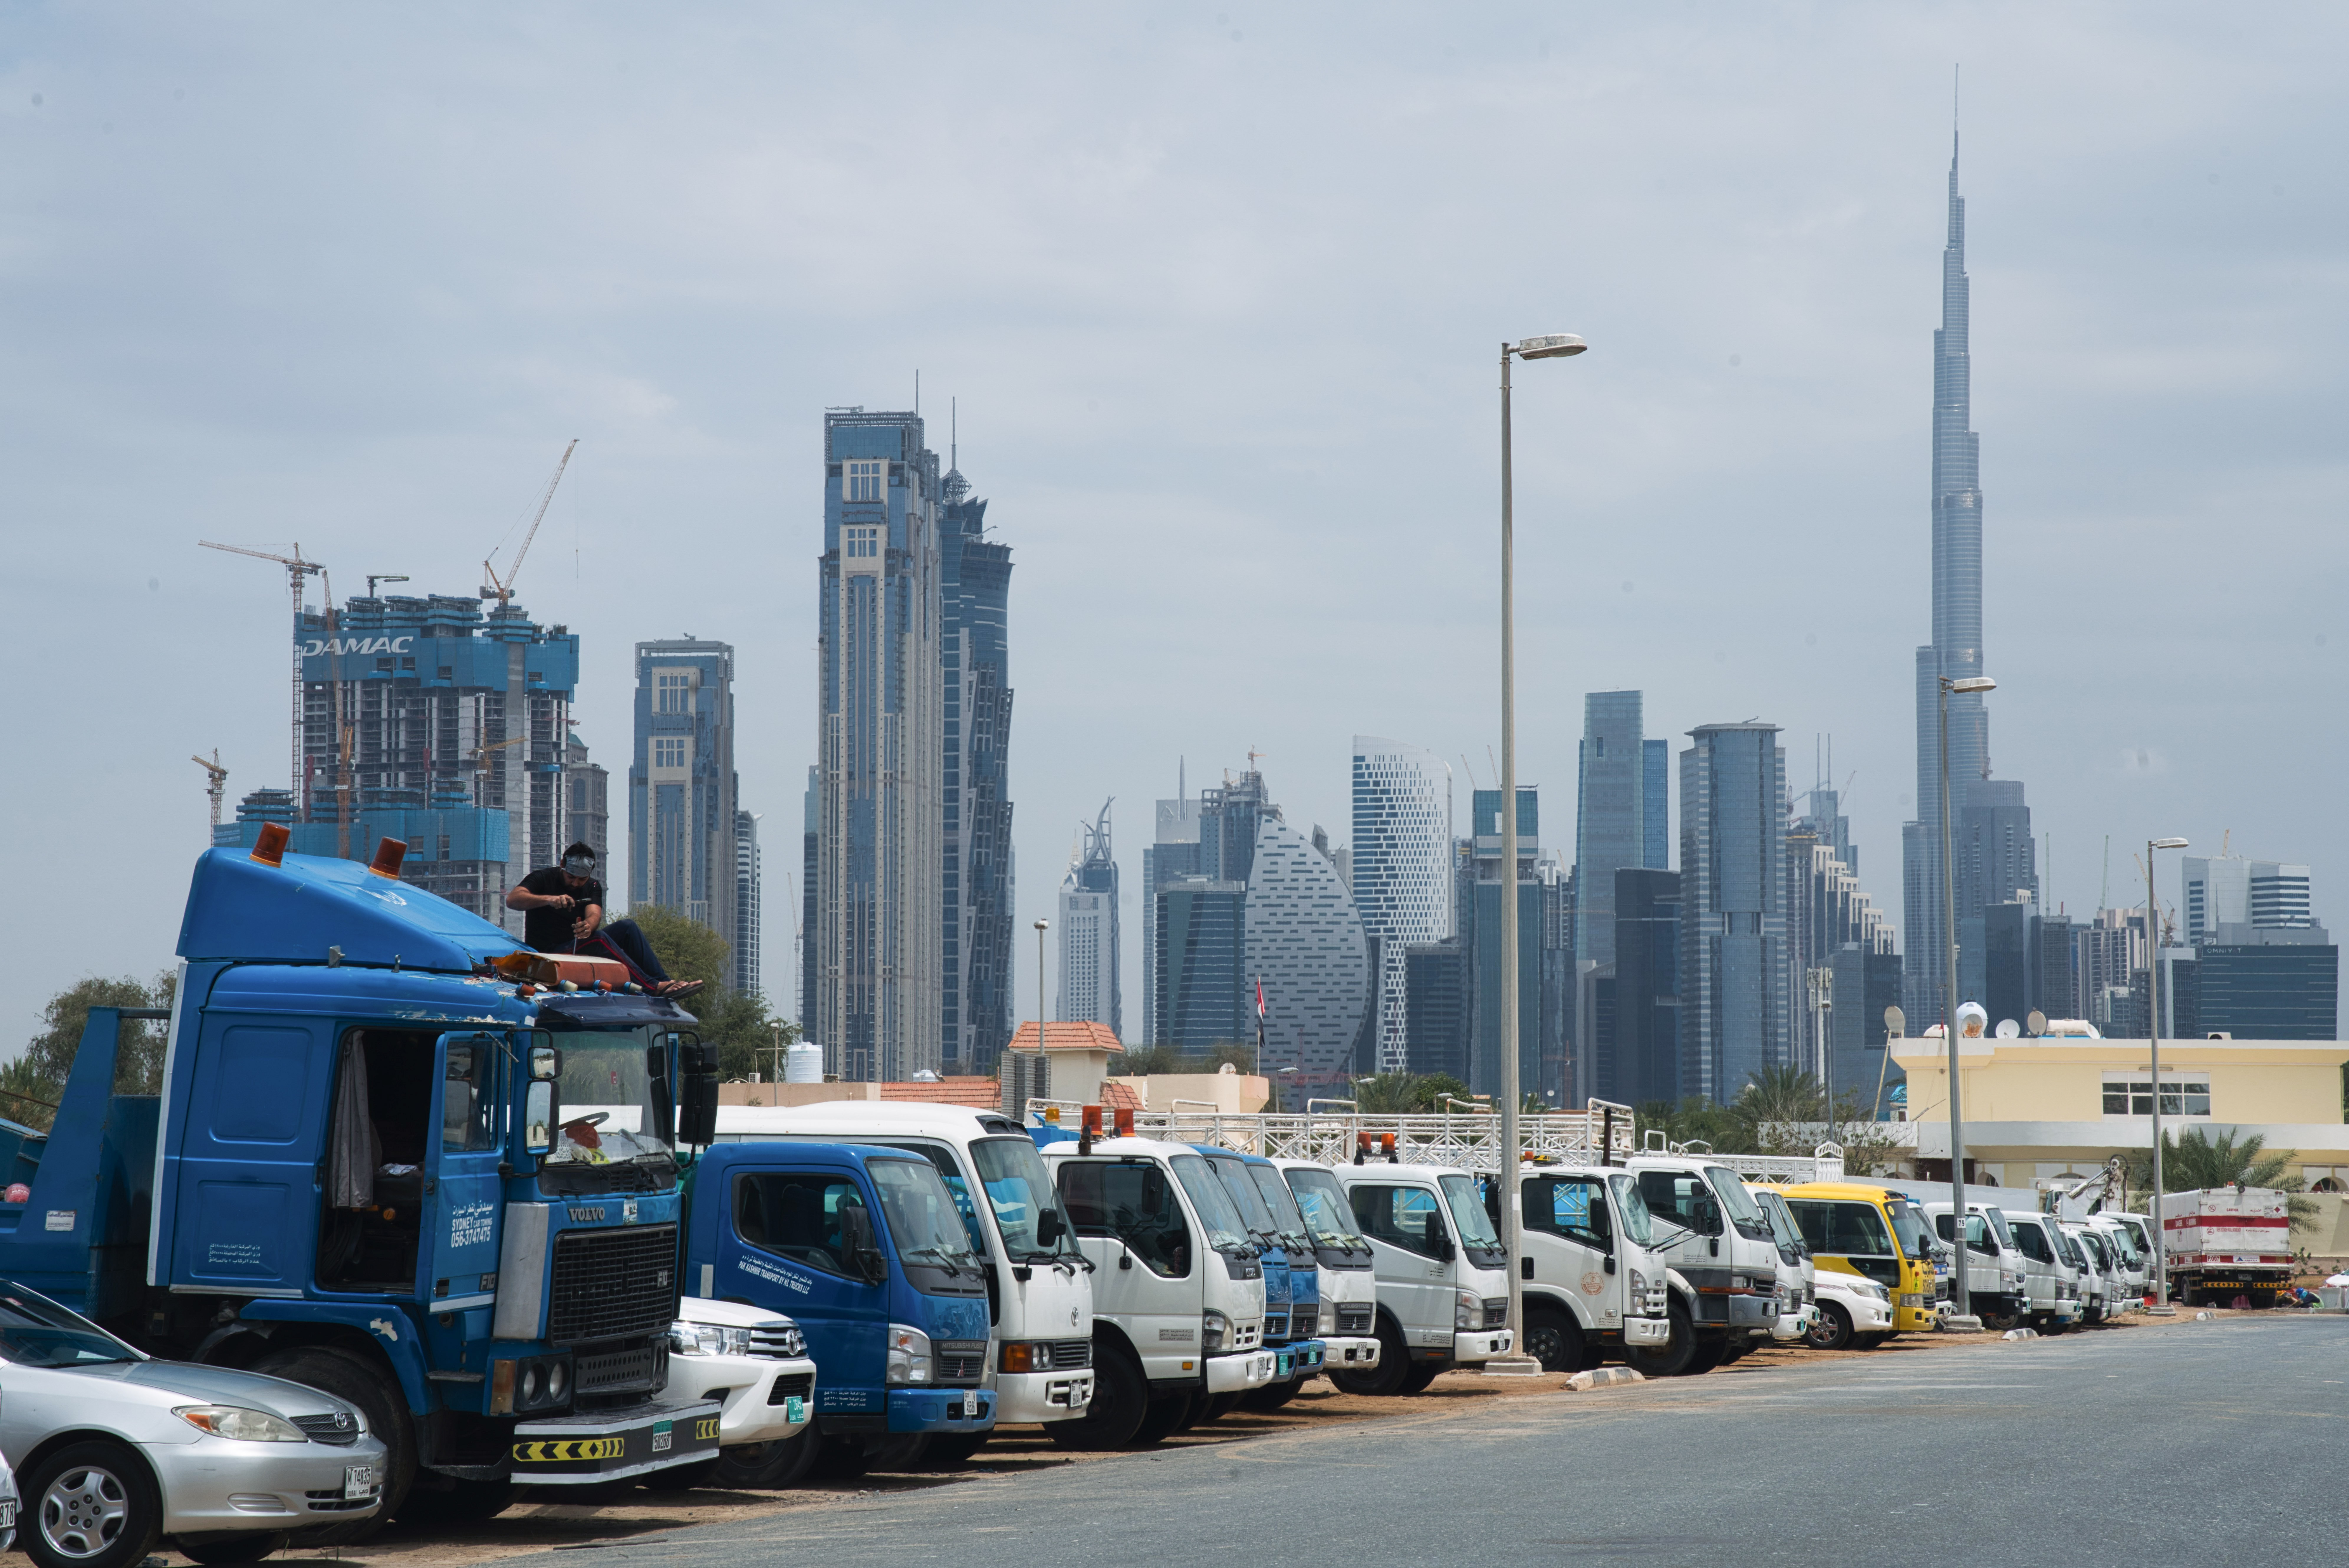 In this Thursday, April 16, 2020 photo, a truck driver works on the cab of his vehicle as Dubai's skyscrapers loom in the background, in Dubai, United Arab Emirates. Migrant workers in oil-rich Gulf Arab states find themselves trapped by the coronavirus pandemic. They are losing jobs, running out of money and desperate to return home as the coronavirus, stalks their labor camps. An unknown number of workers have contracted the virus or have suddenly been forced into mass quarantines, leaving them exposed and painfully vulnerable with little recourse for help. Photo: AP